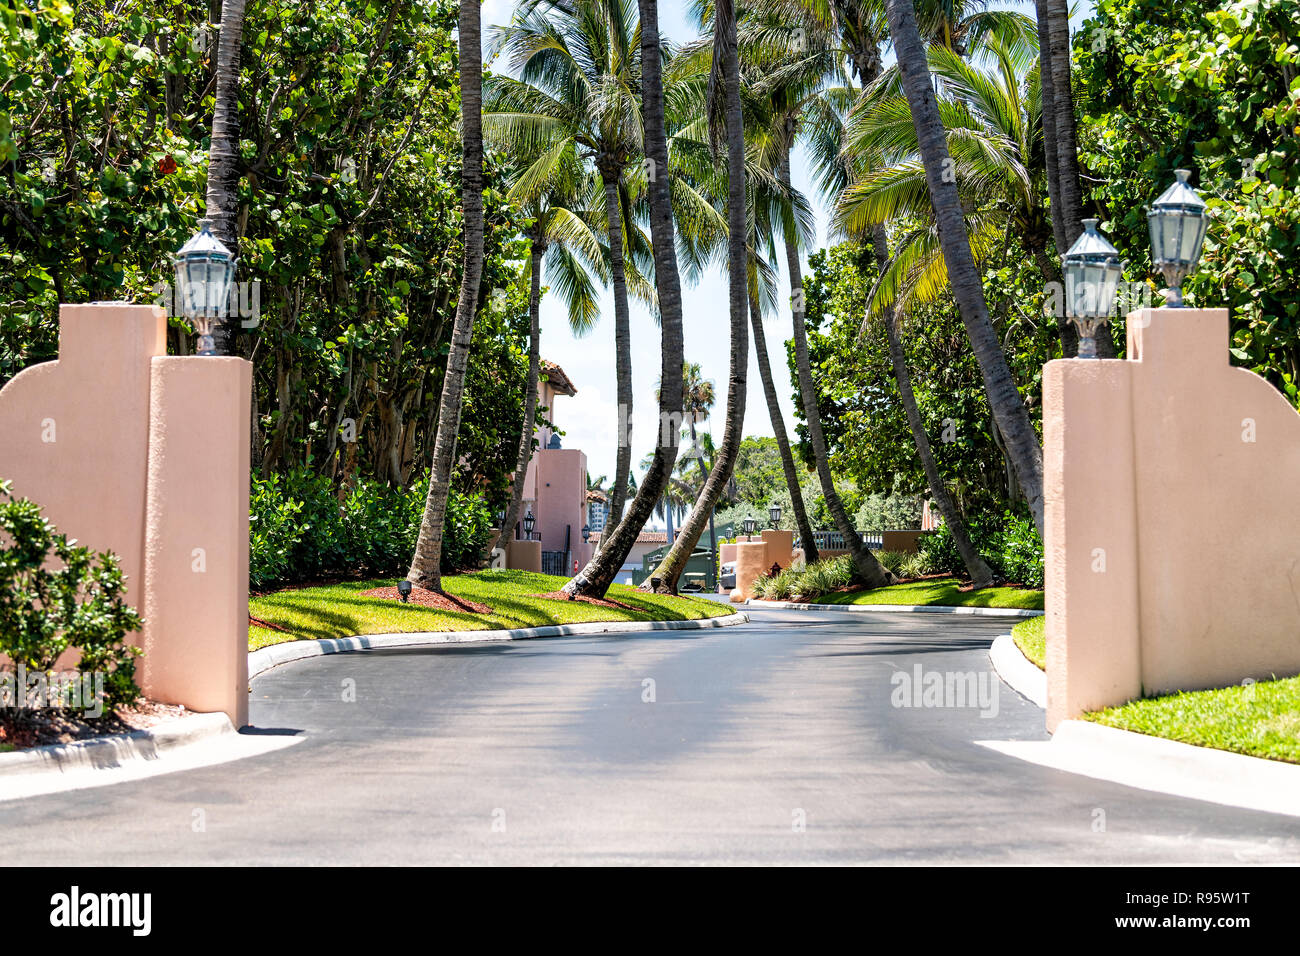 Palm Beach, USA - May 9, 2018: Mar-a-lago, presidential residence of Donald J Trump, American president in Florida with entrance gate, nobody at resor Stock Photo